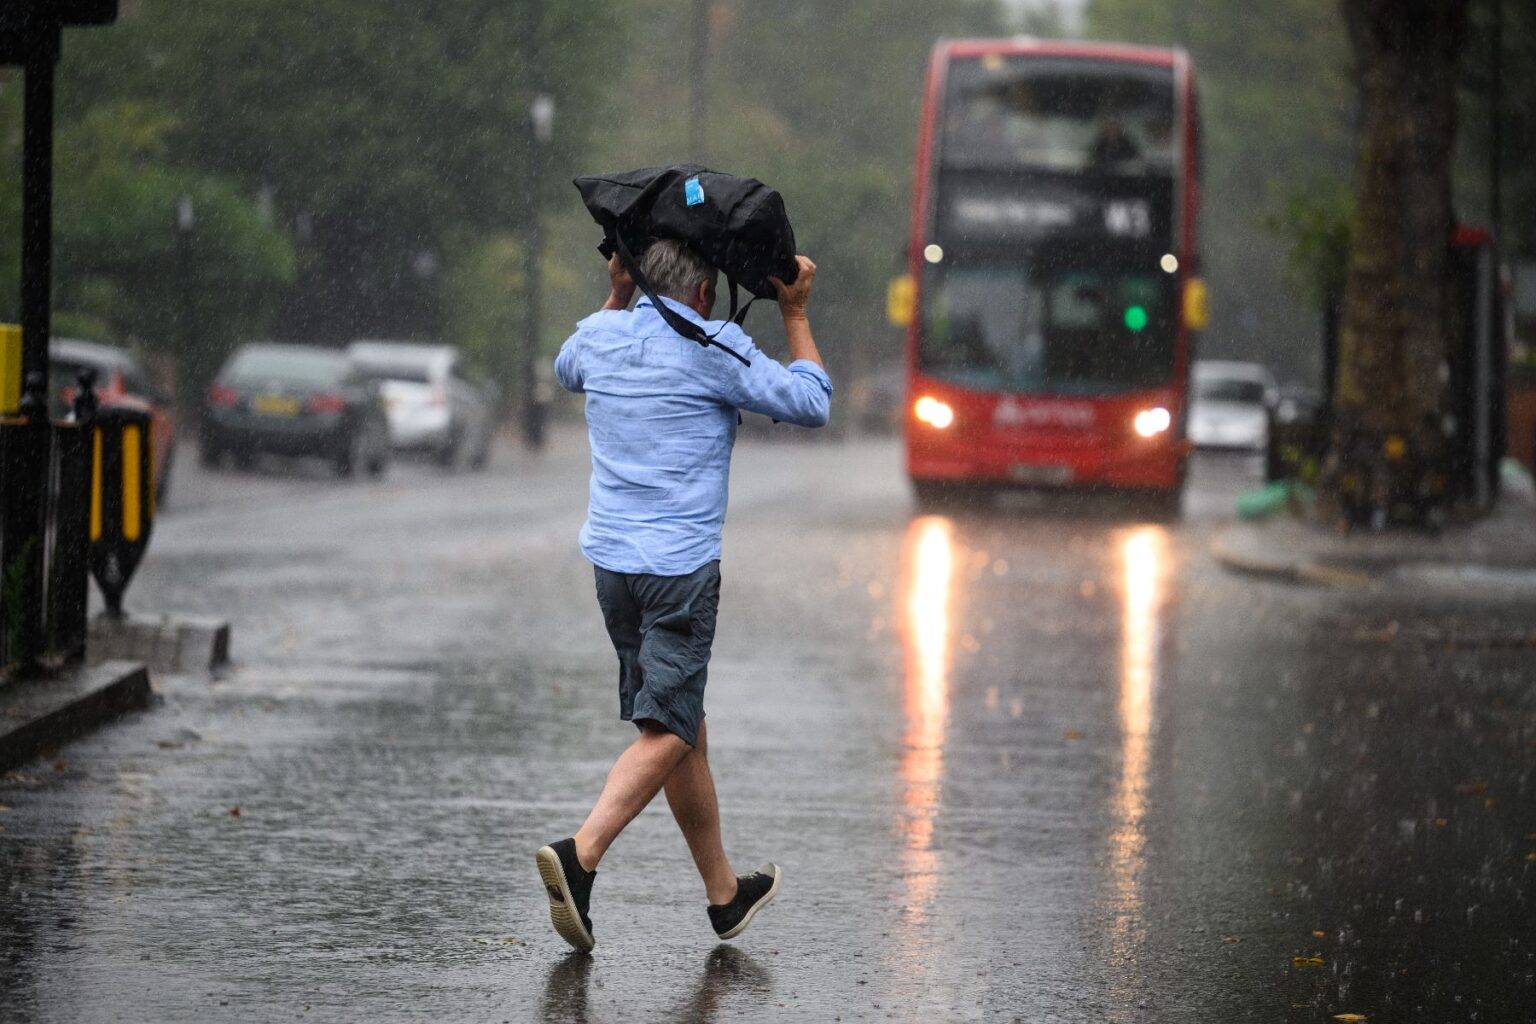 Heavy rain alert issued for large part of the UK and warnings of travel disruption